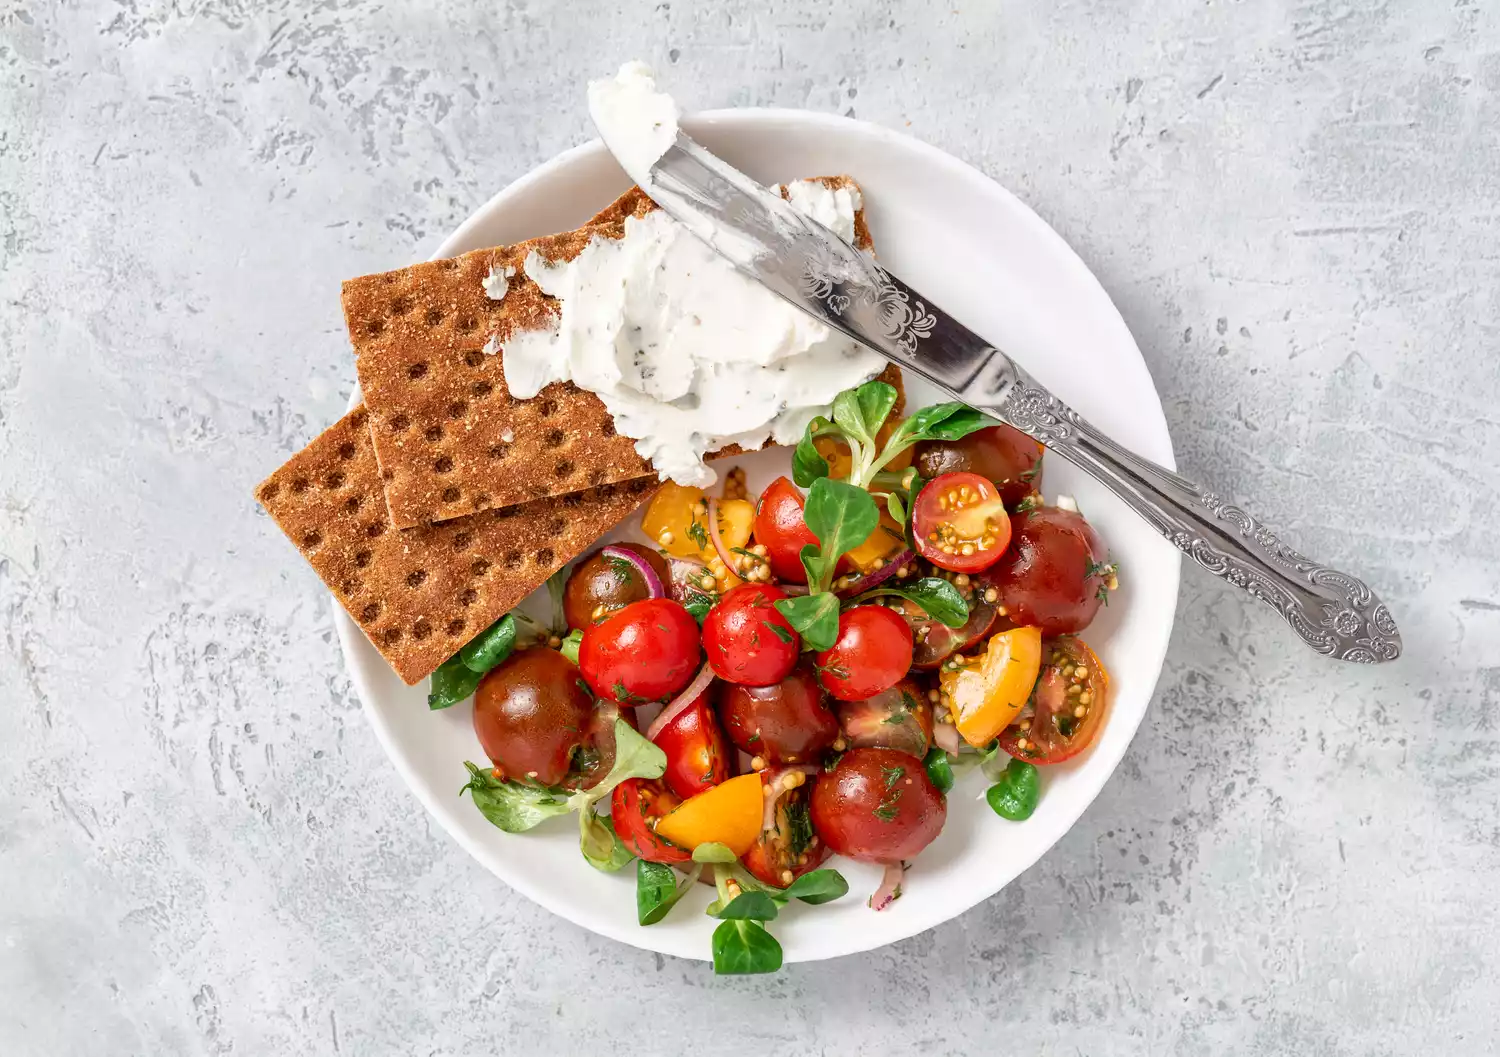 whipped feta on crackers with tomato salad